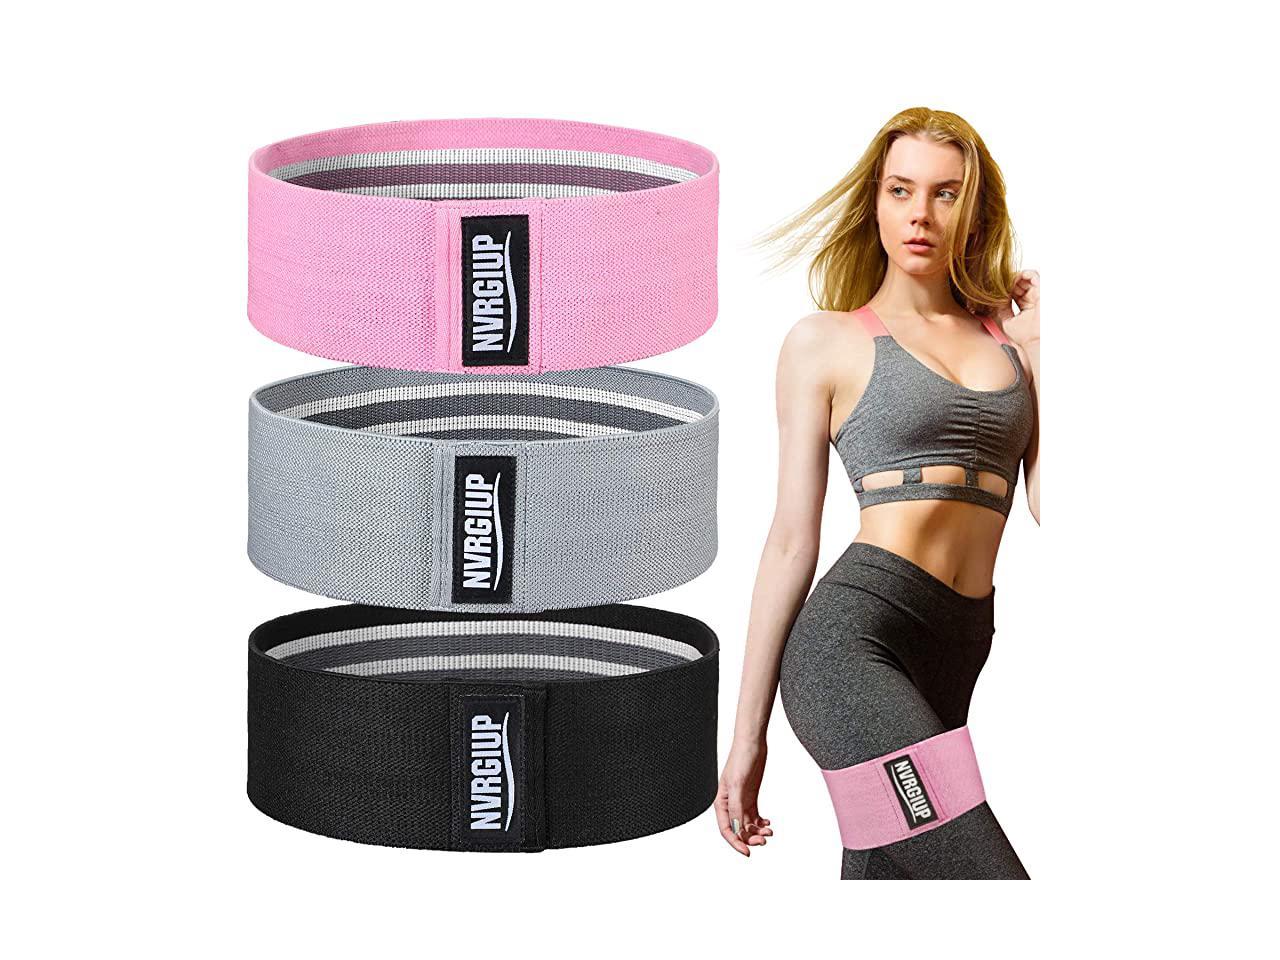 Exercise Resistance Bands for Legs and Glute Upgrade Thicken Anti Slip Roll